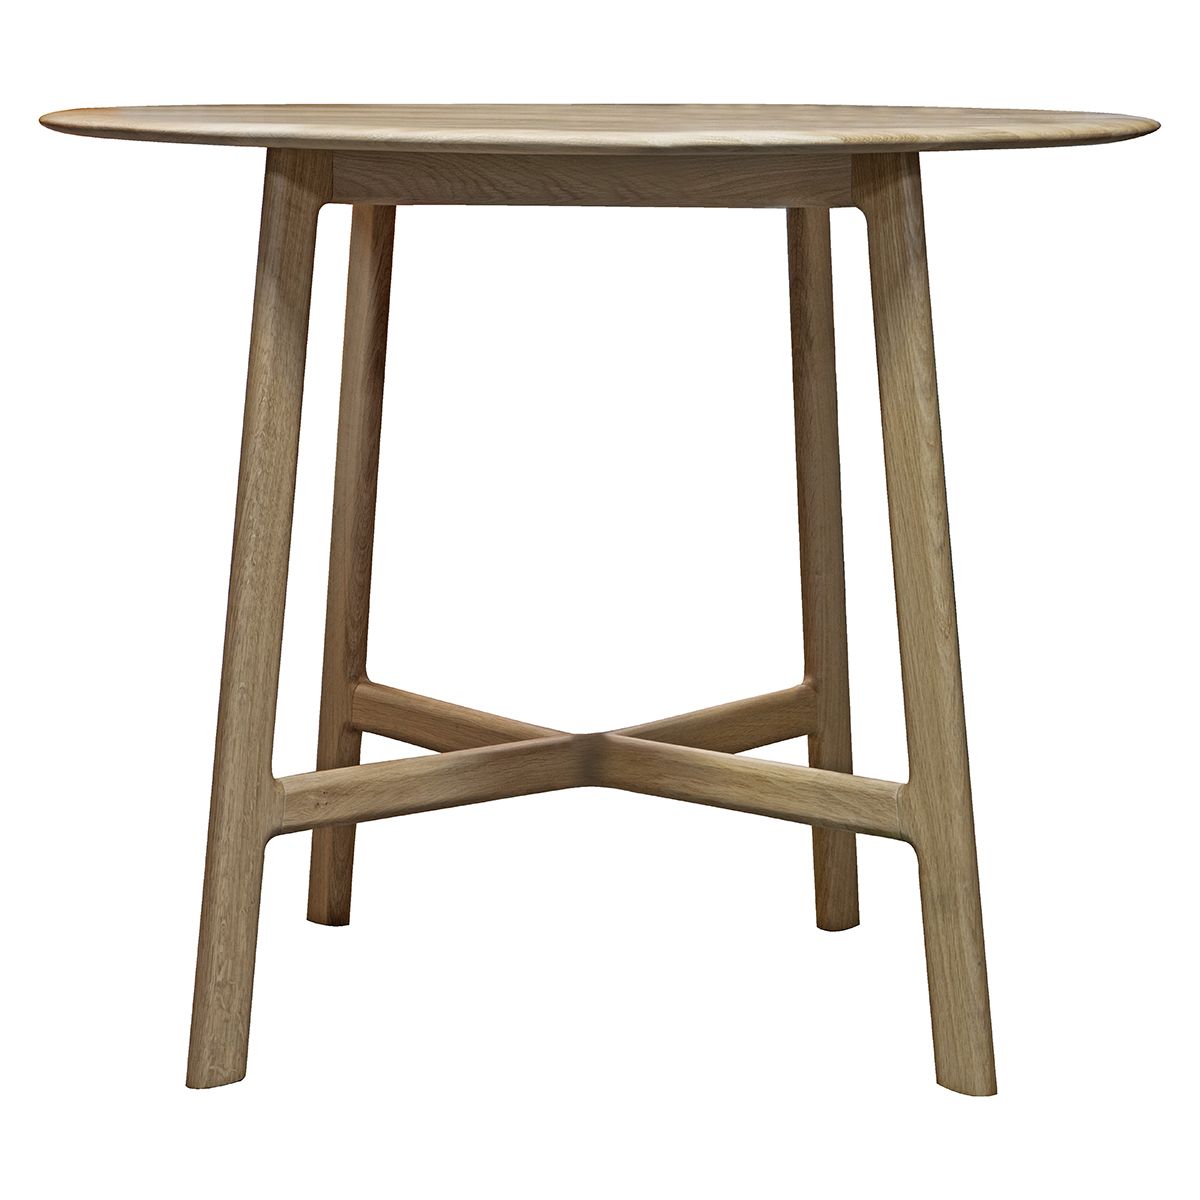 Cumbrian Round Dining Table